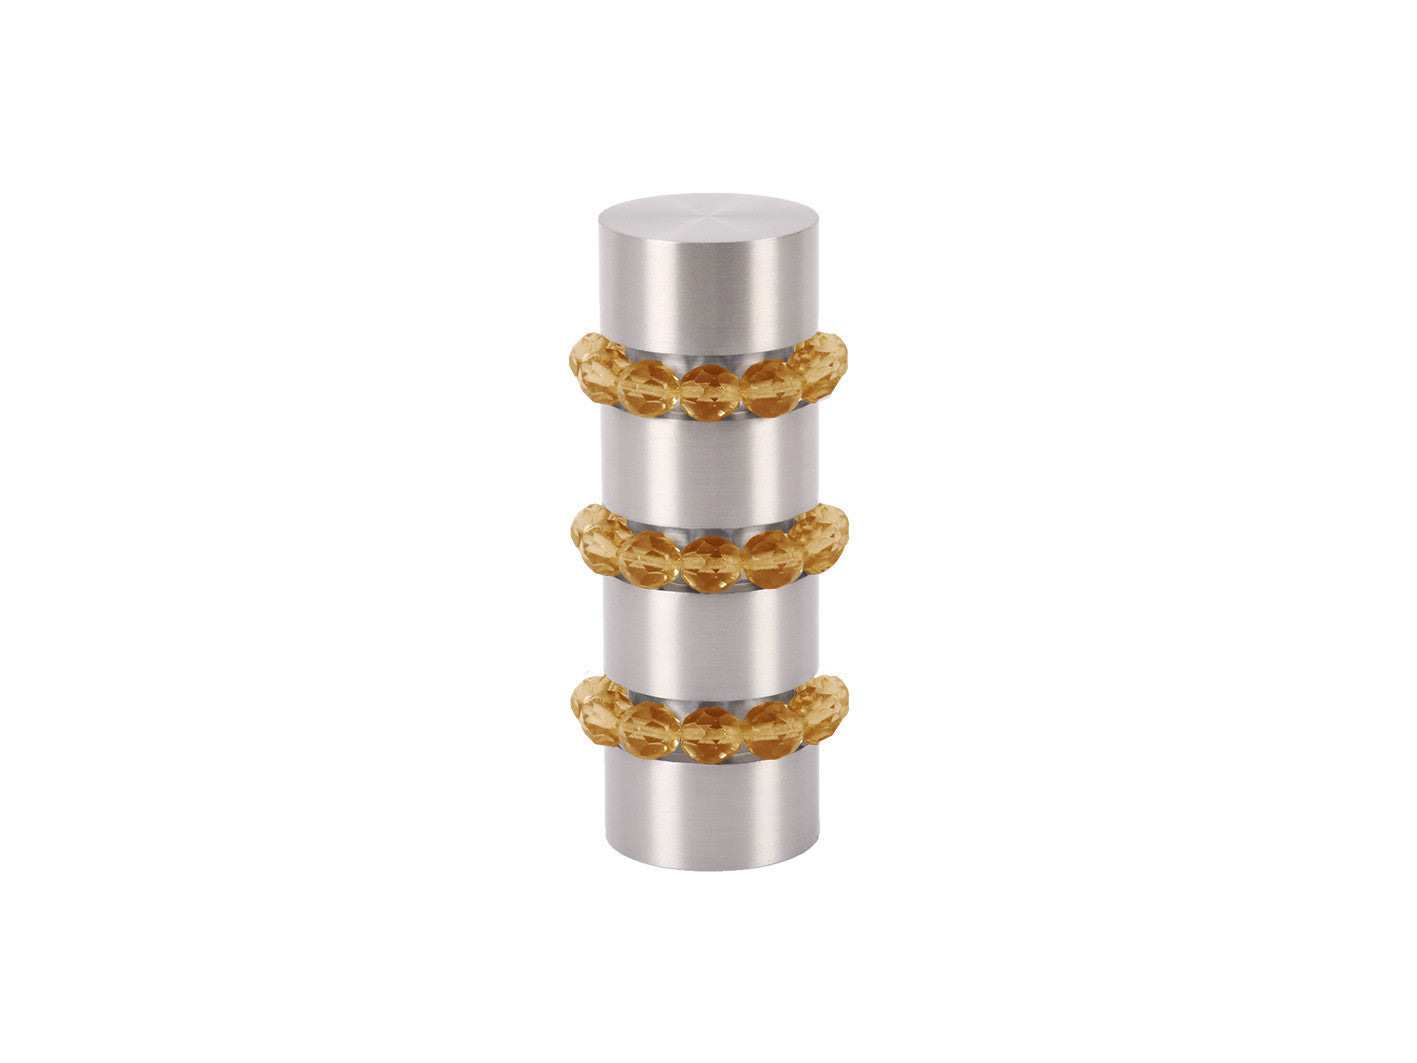 Beaded stainless steel curtain pole finial in honey gold glass | Walcot House 19mm collection